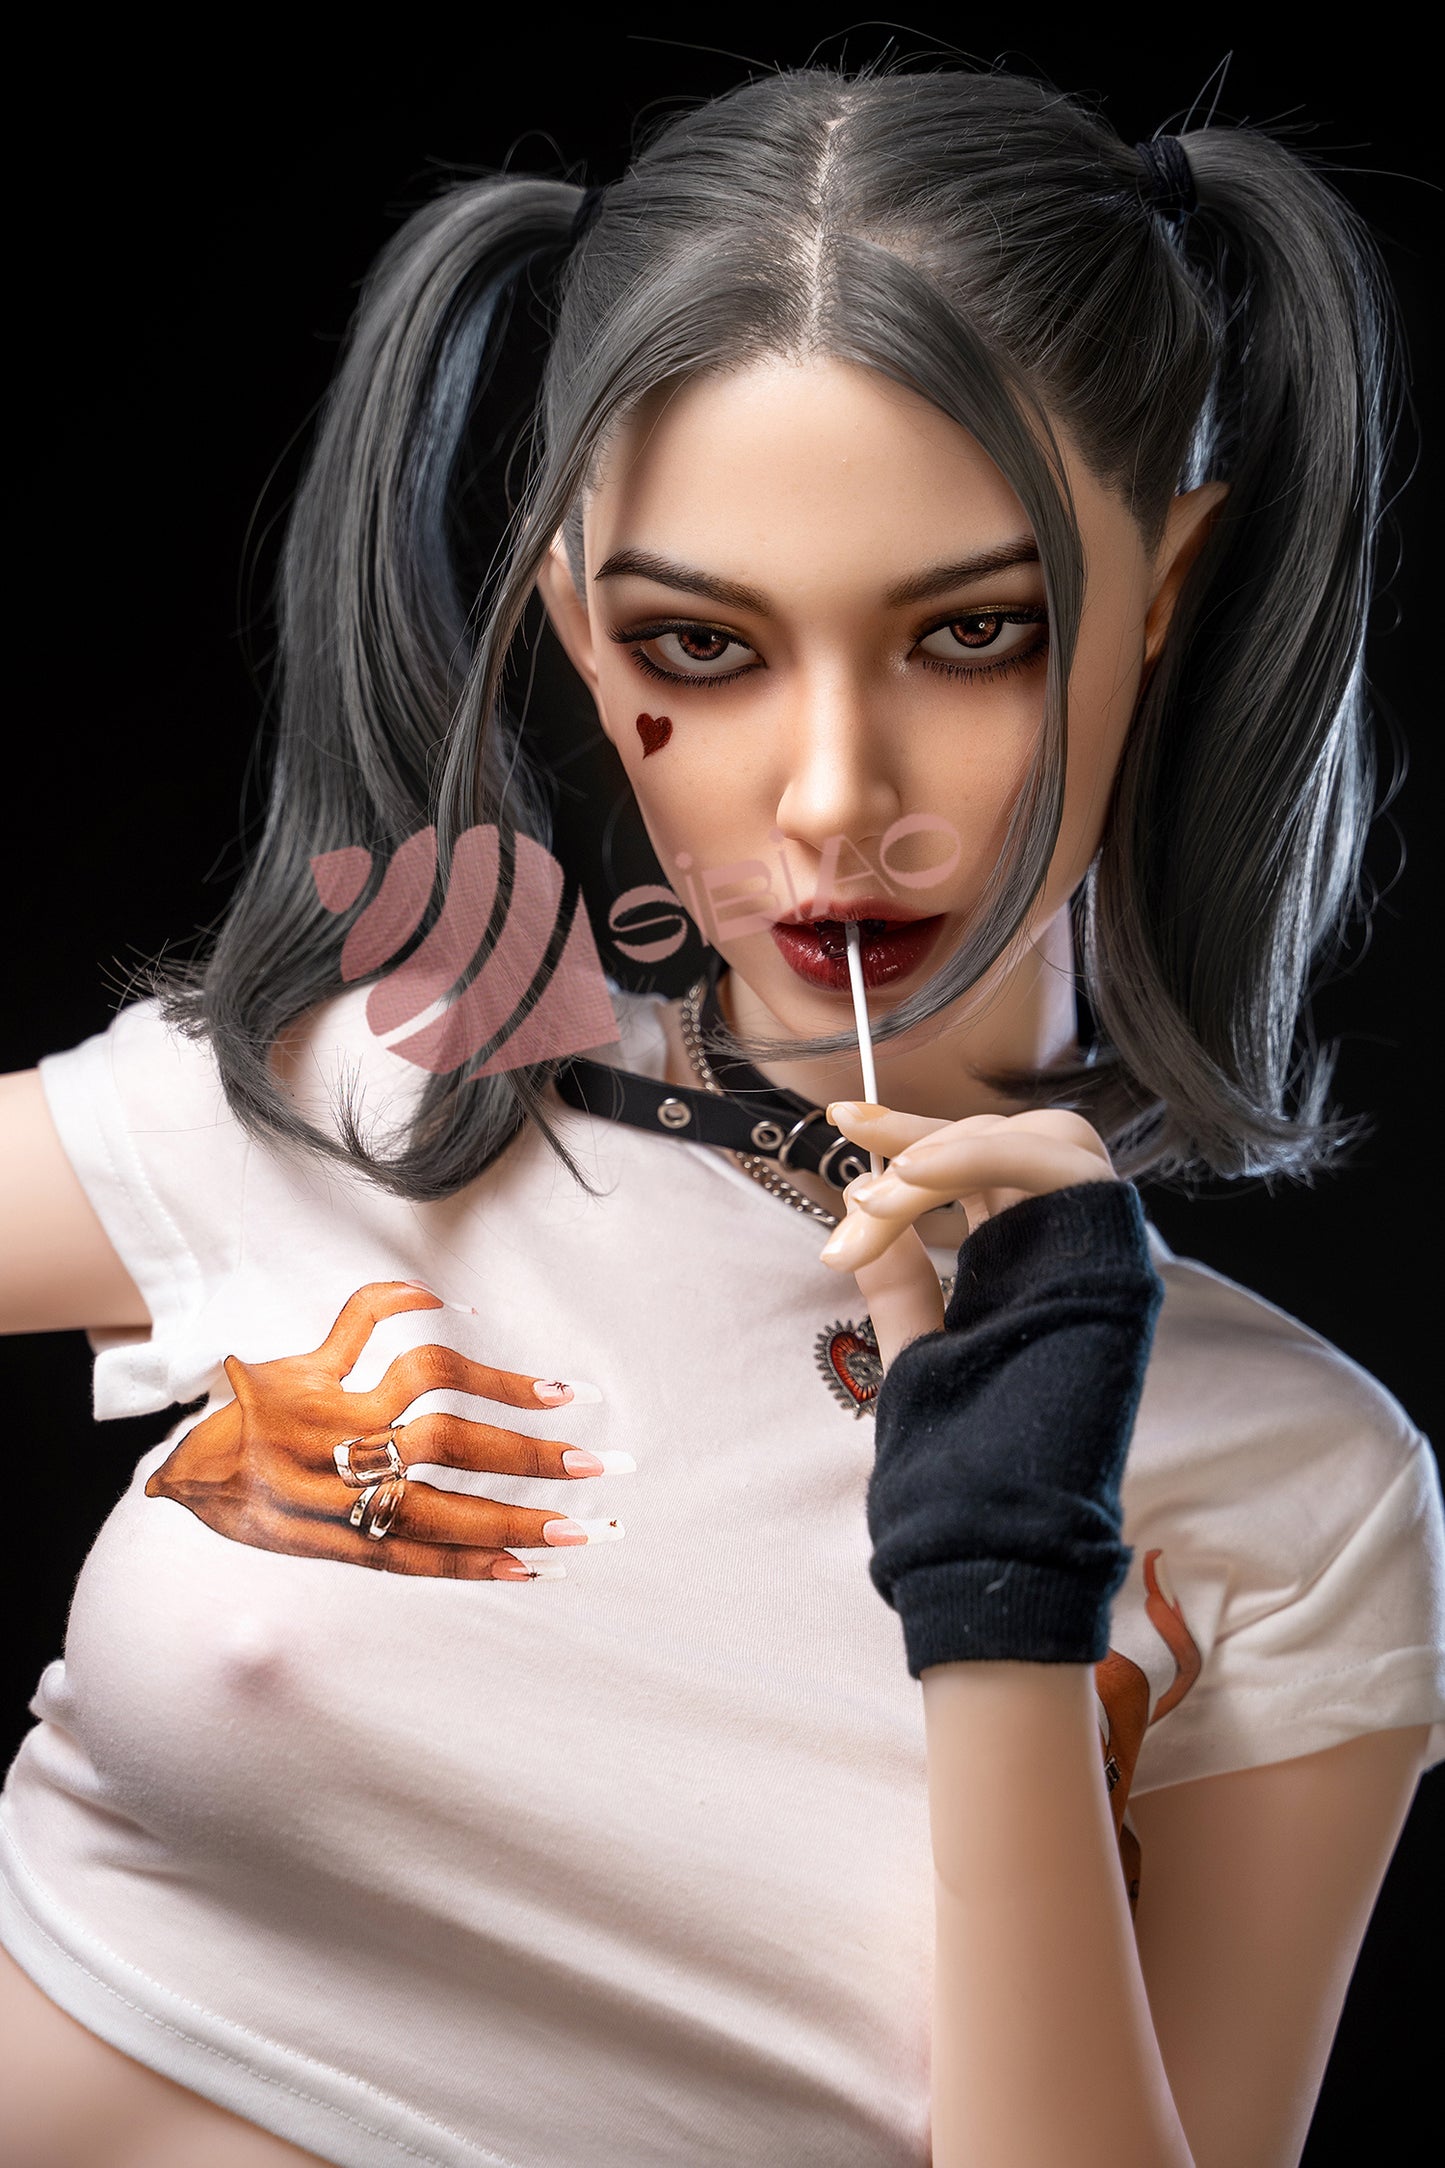 173cm/67in. SIA#173-M7 Harley Quinn Sexy Cos Real Doll With Mouth Glue（Free shipping in the continental US and EU）